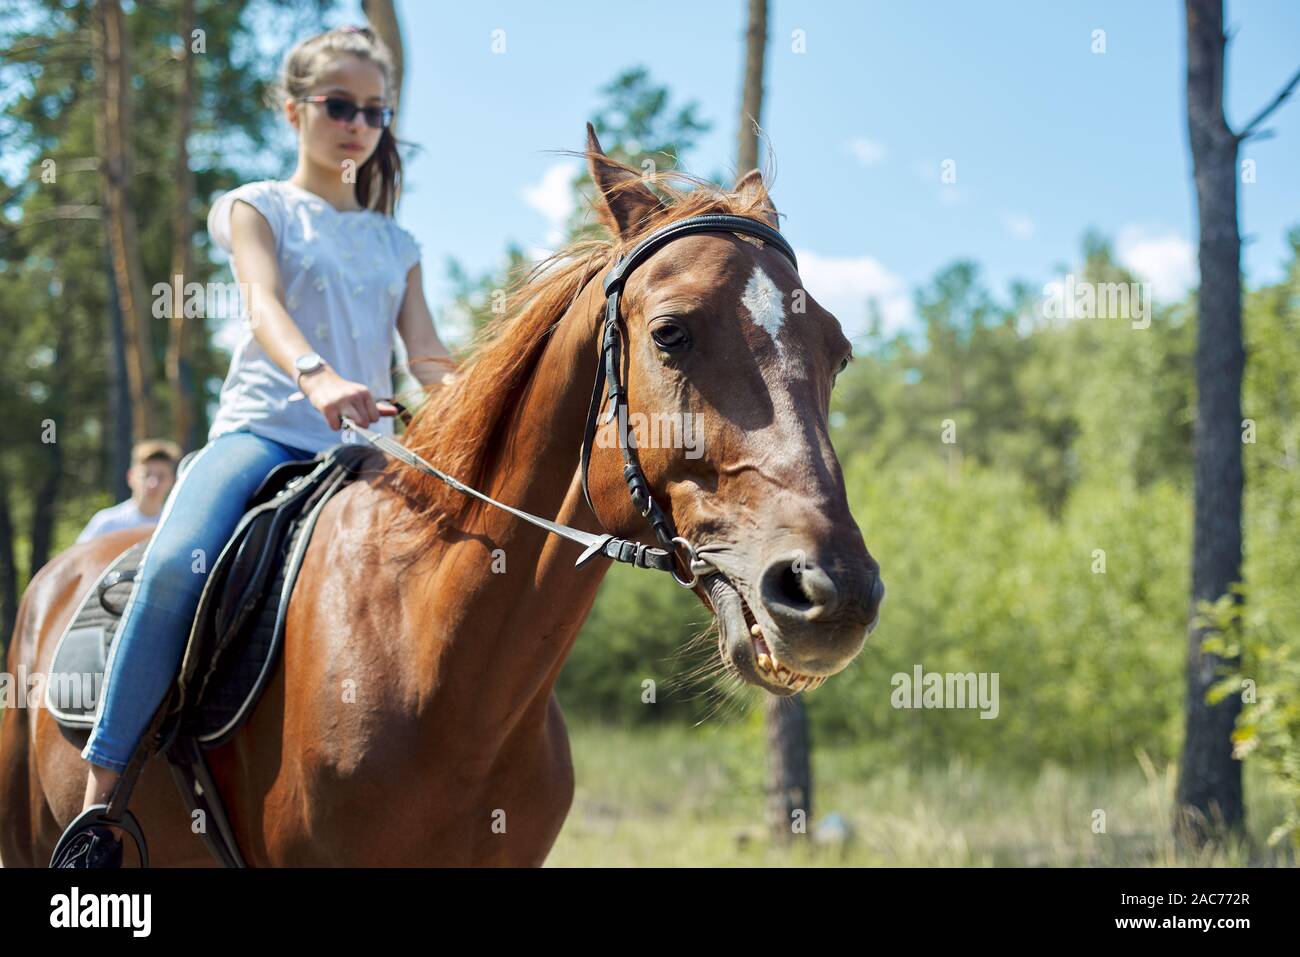 Close up of brown horse running with teenage rider girl, horse face looking at the camera Stock Photo